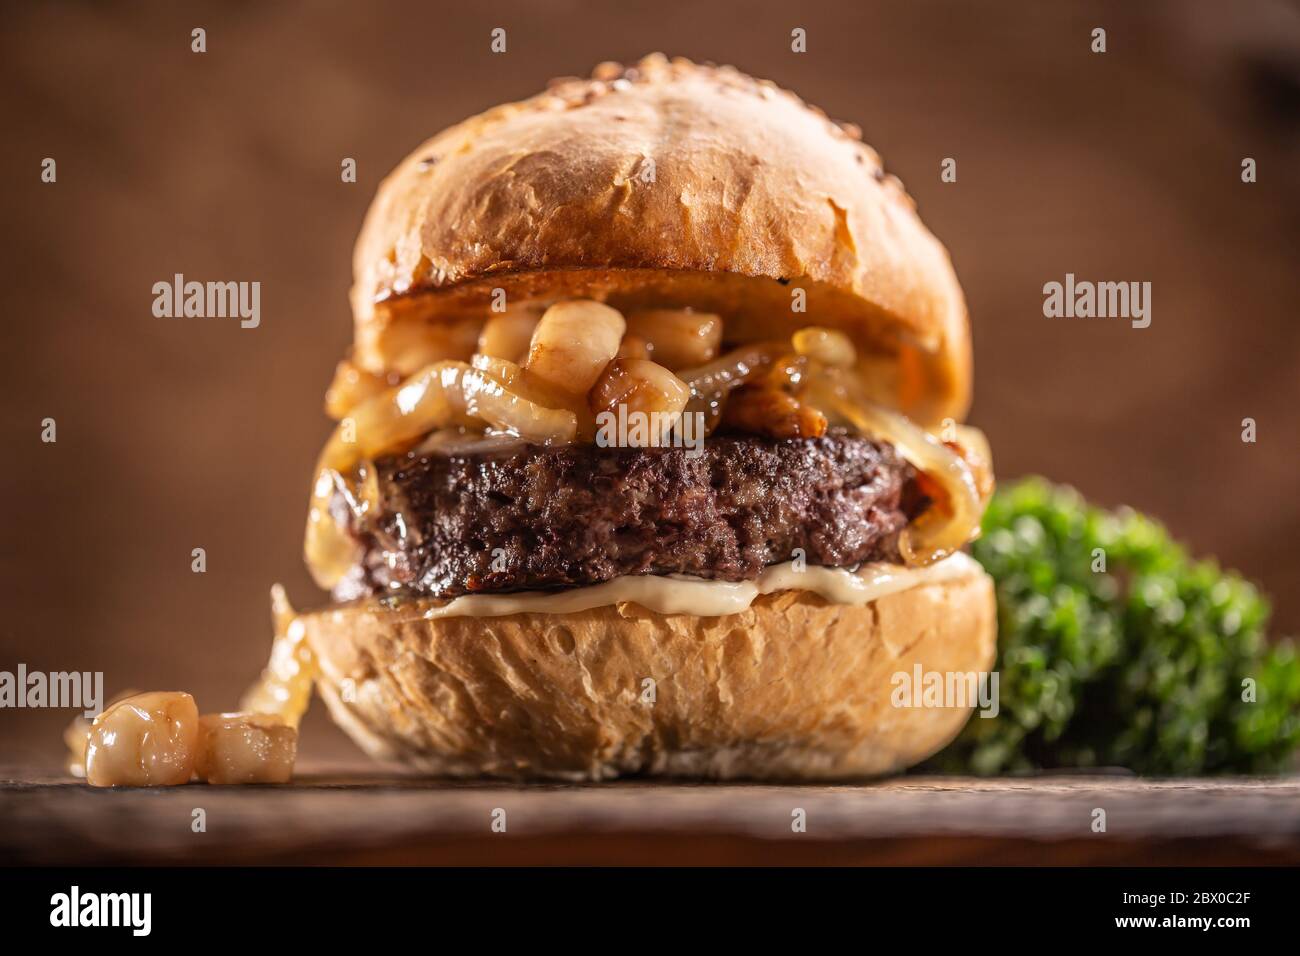 Beef burger with melted cheese, caramelized onions in a sesame bun Stock Photo